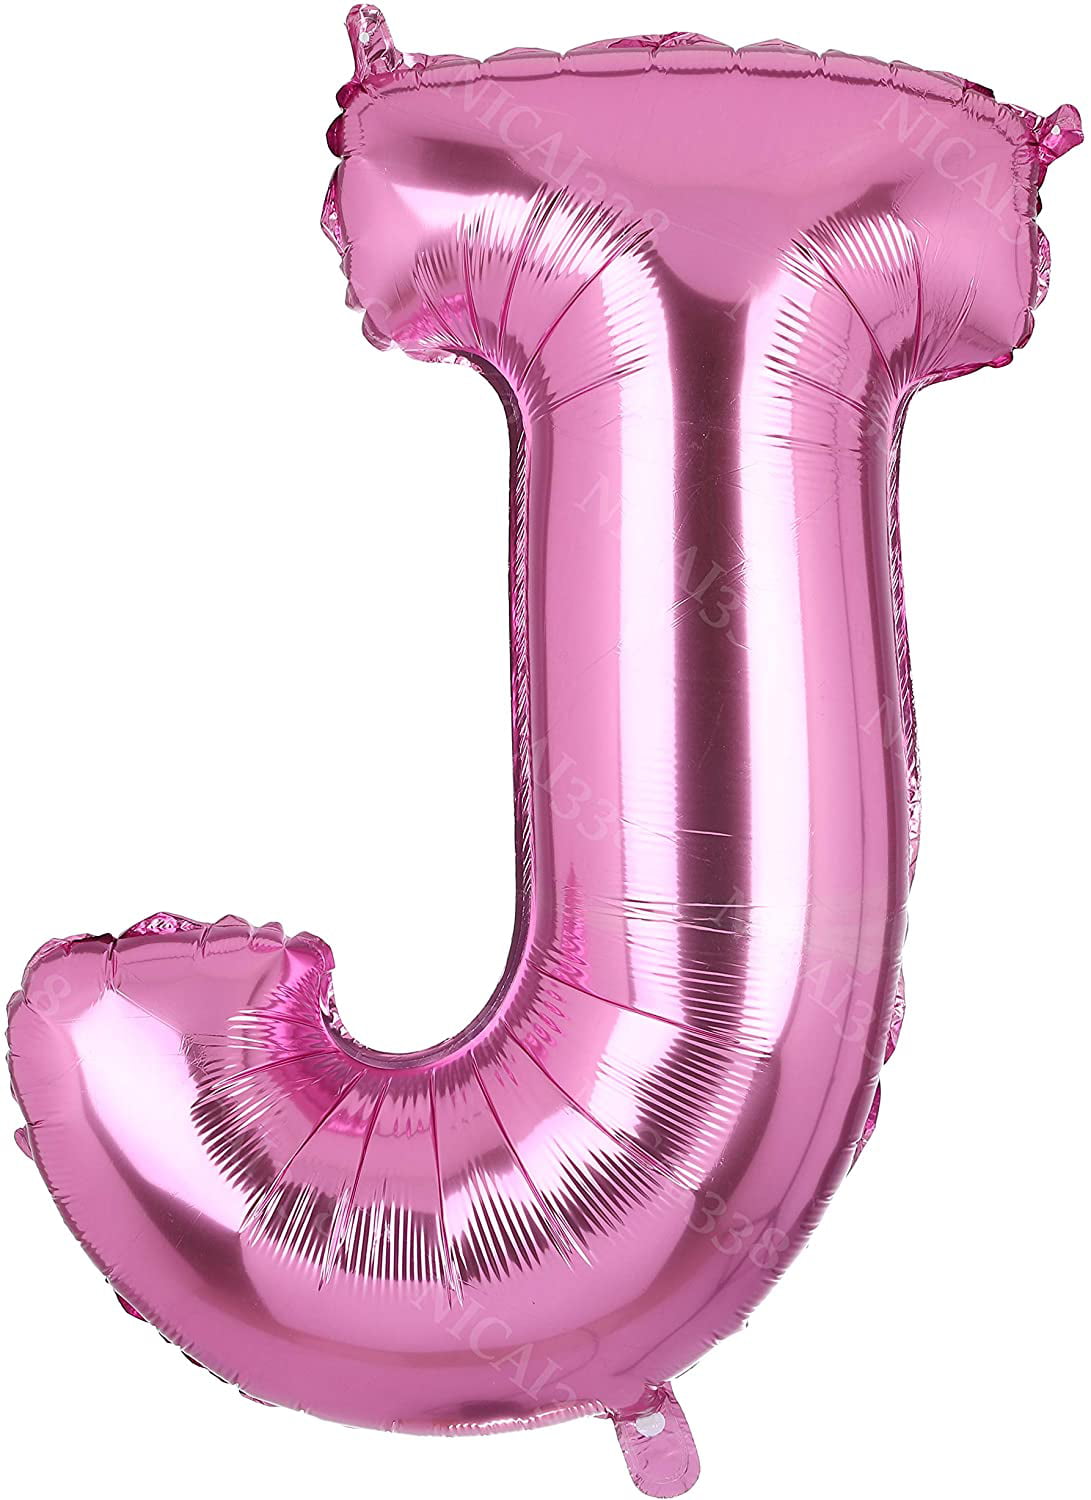 40 Inch Large Pink Letter H Foil Balloons Hellium Girls Big Alphabet Mylar Balloon for Birthday Party Decoration Custom Word HH JPink H 